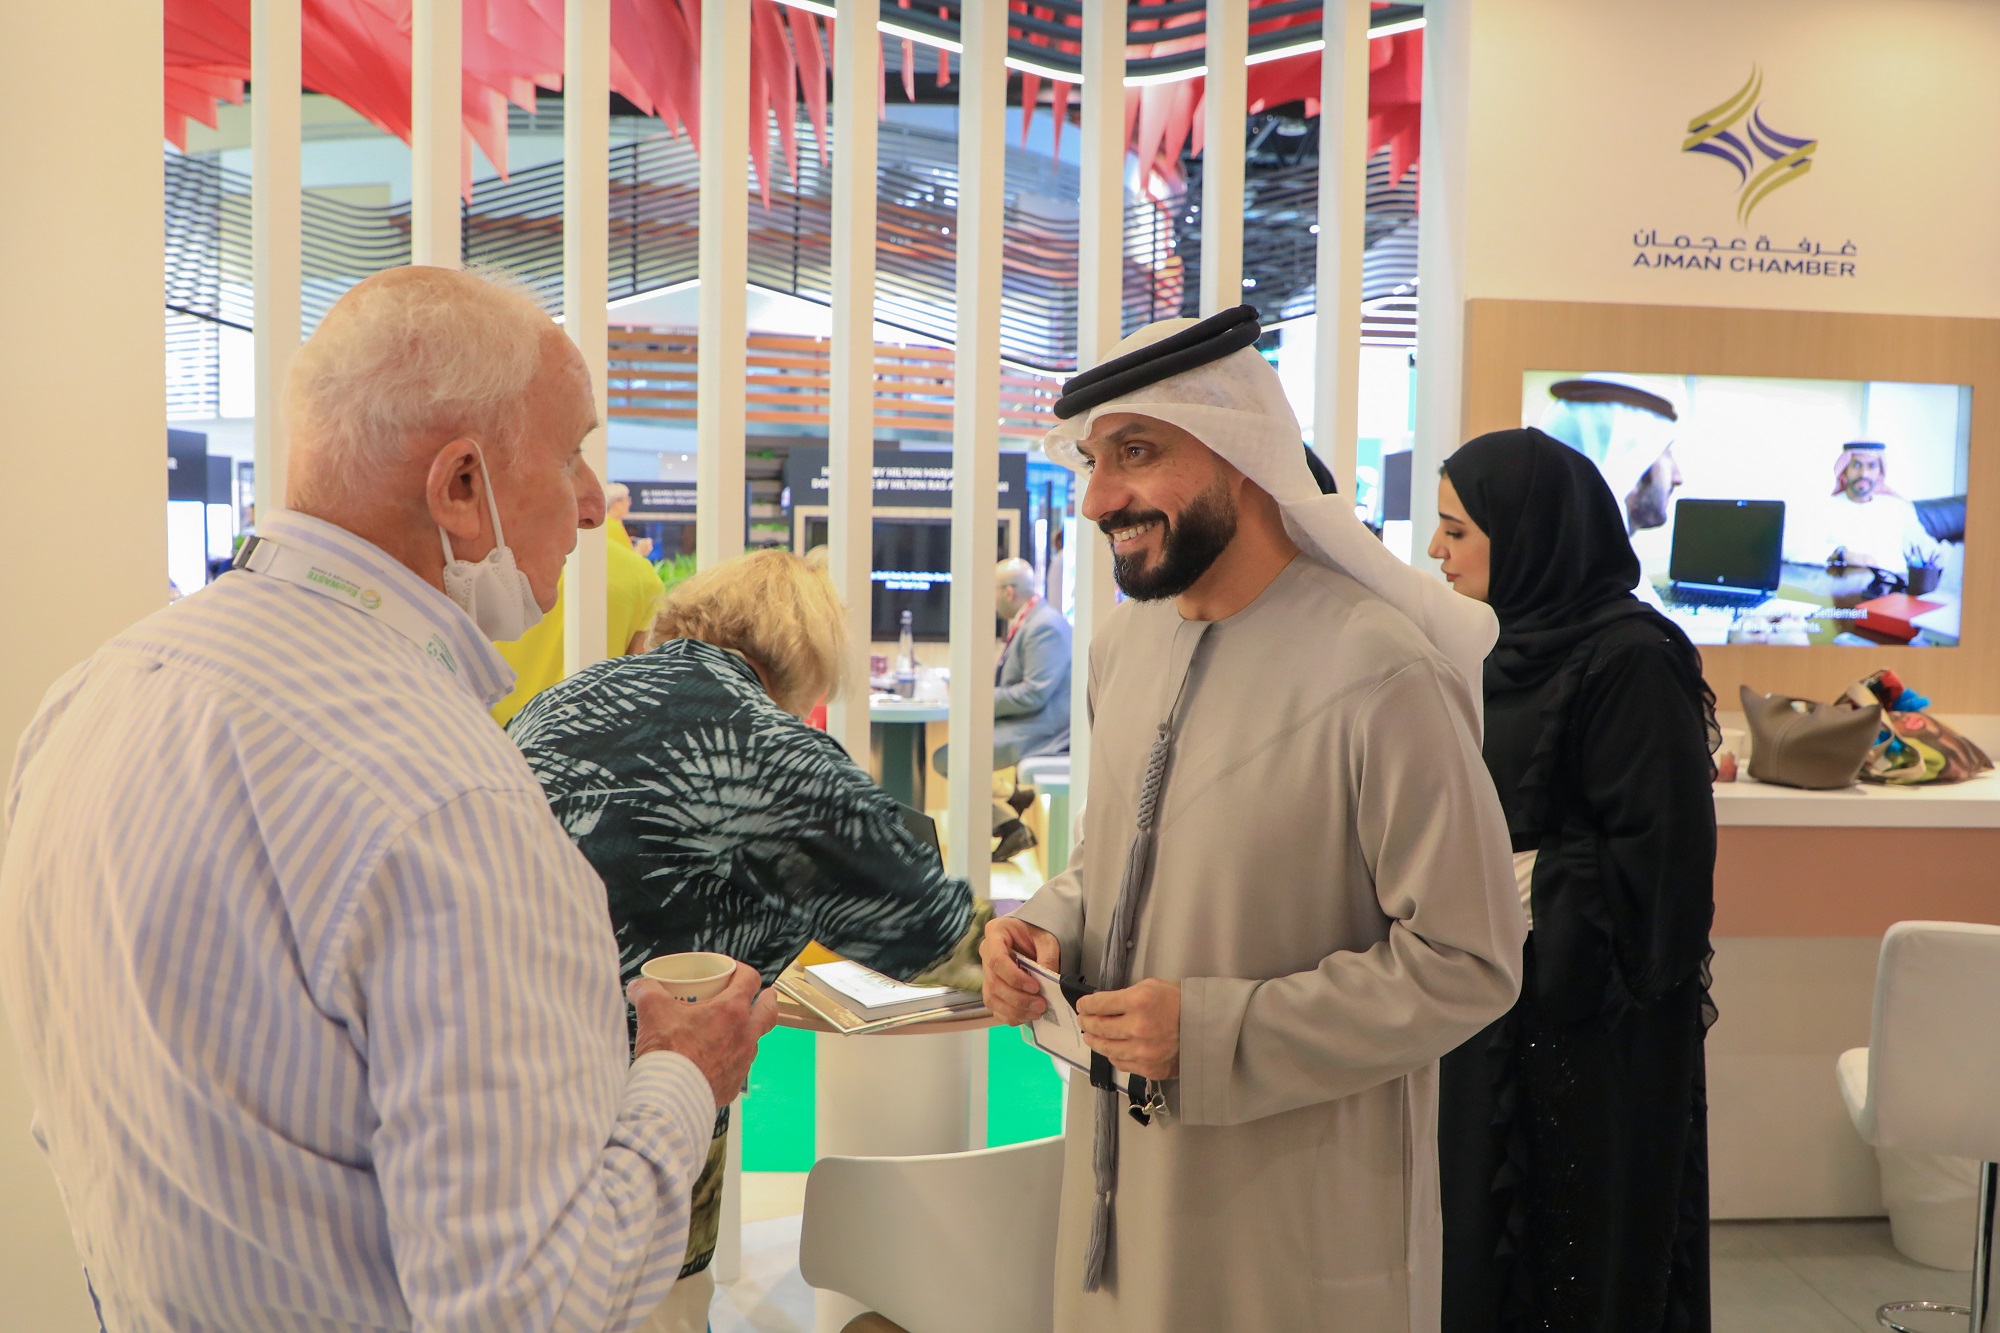 Ajman Chamber Promotes Tourism Investment Opportunities In Ajman At Atm Exhibition